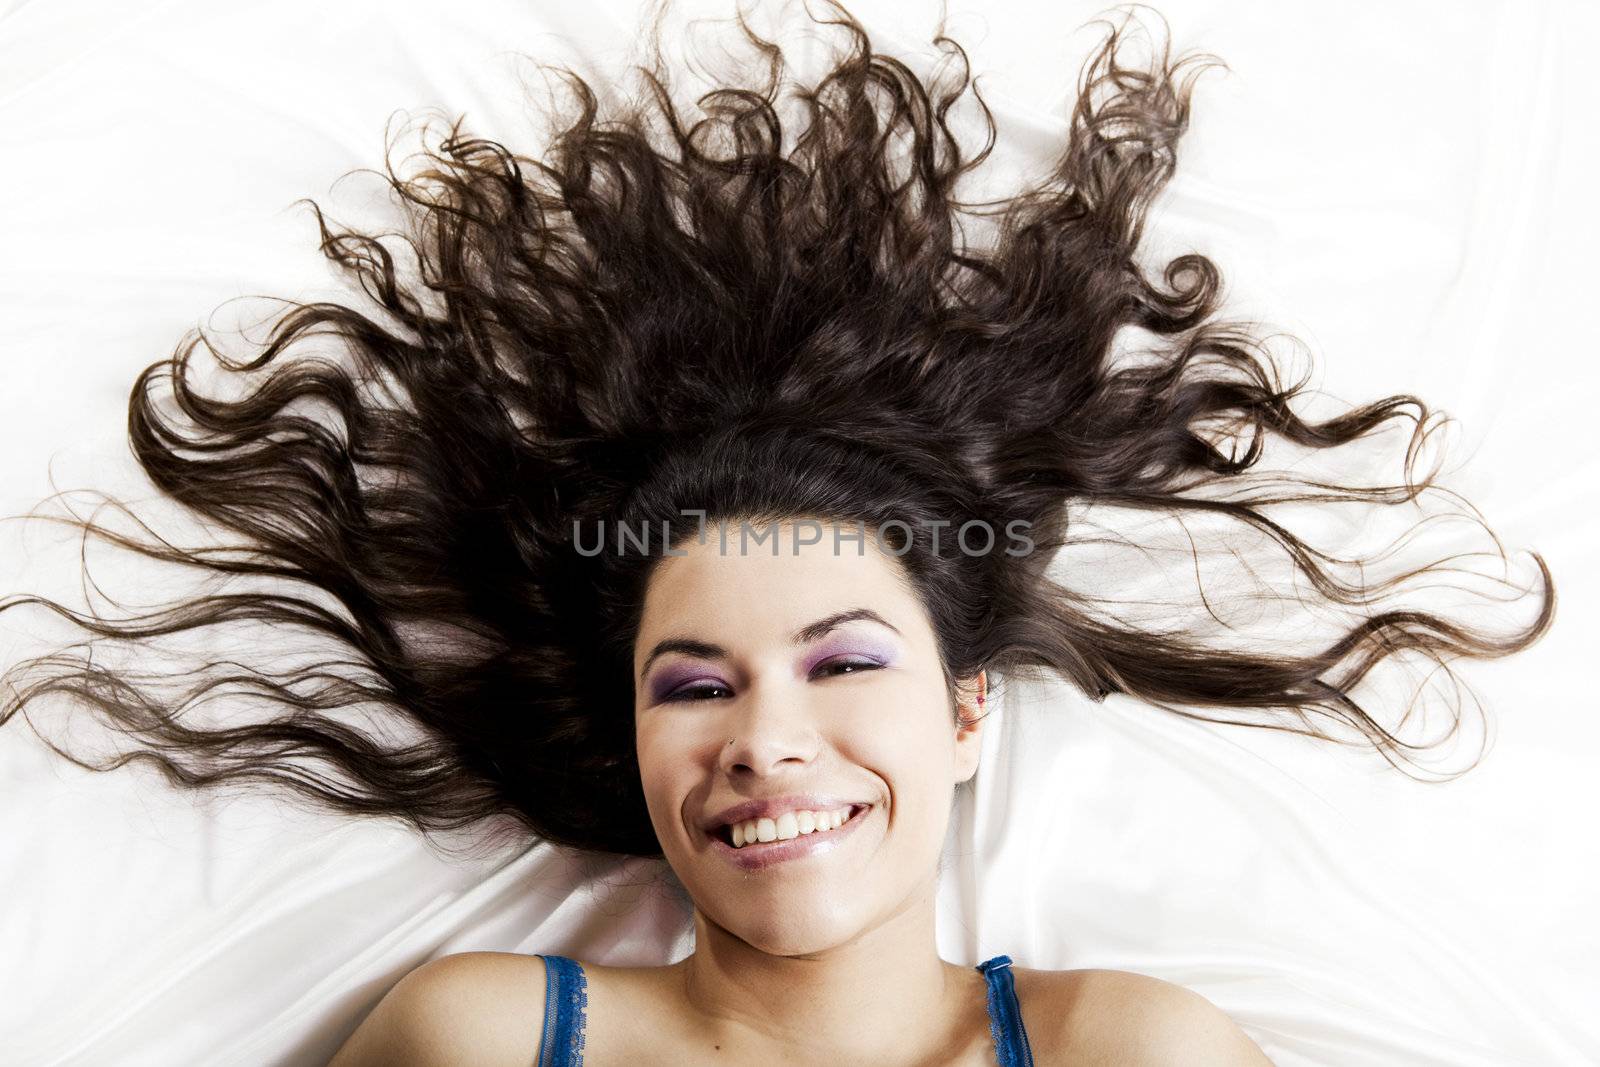 Top view portrait of a beautiful young woman smiling